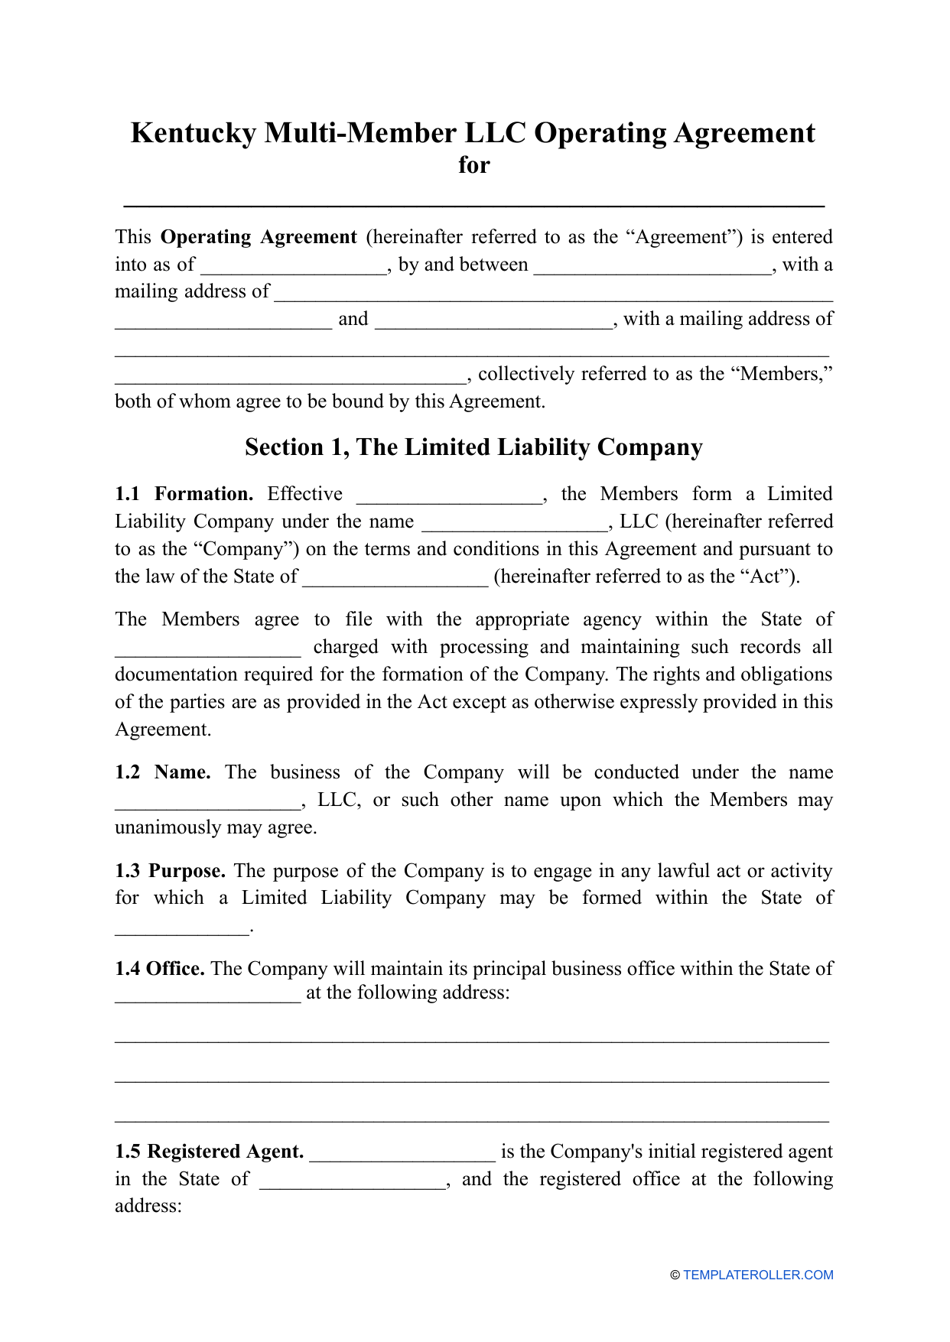 Multi-Member LLC Operating Agreement Template - Kentucky, Page 1